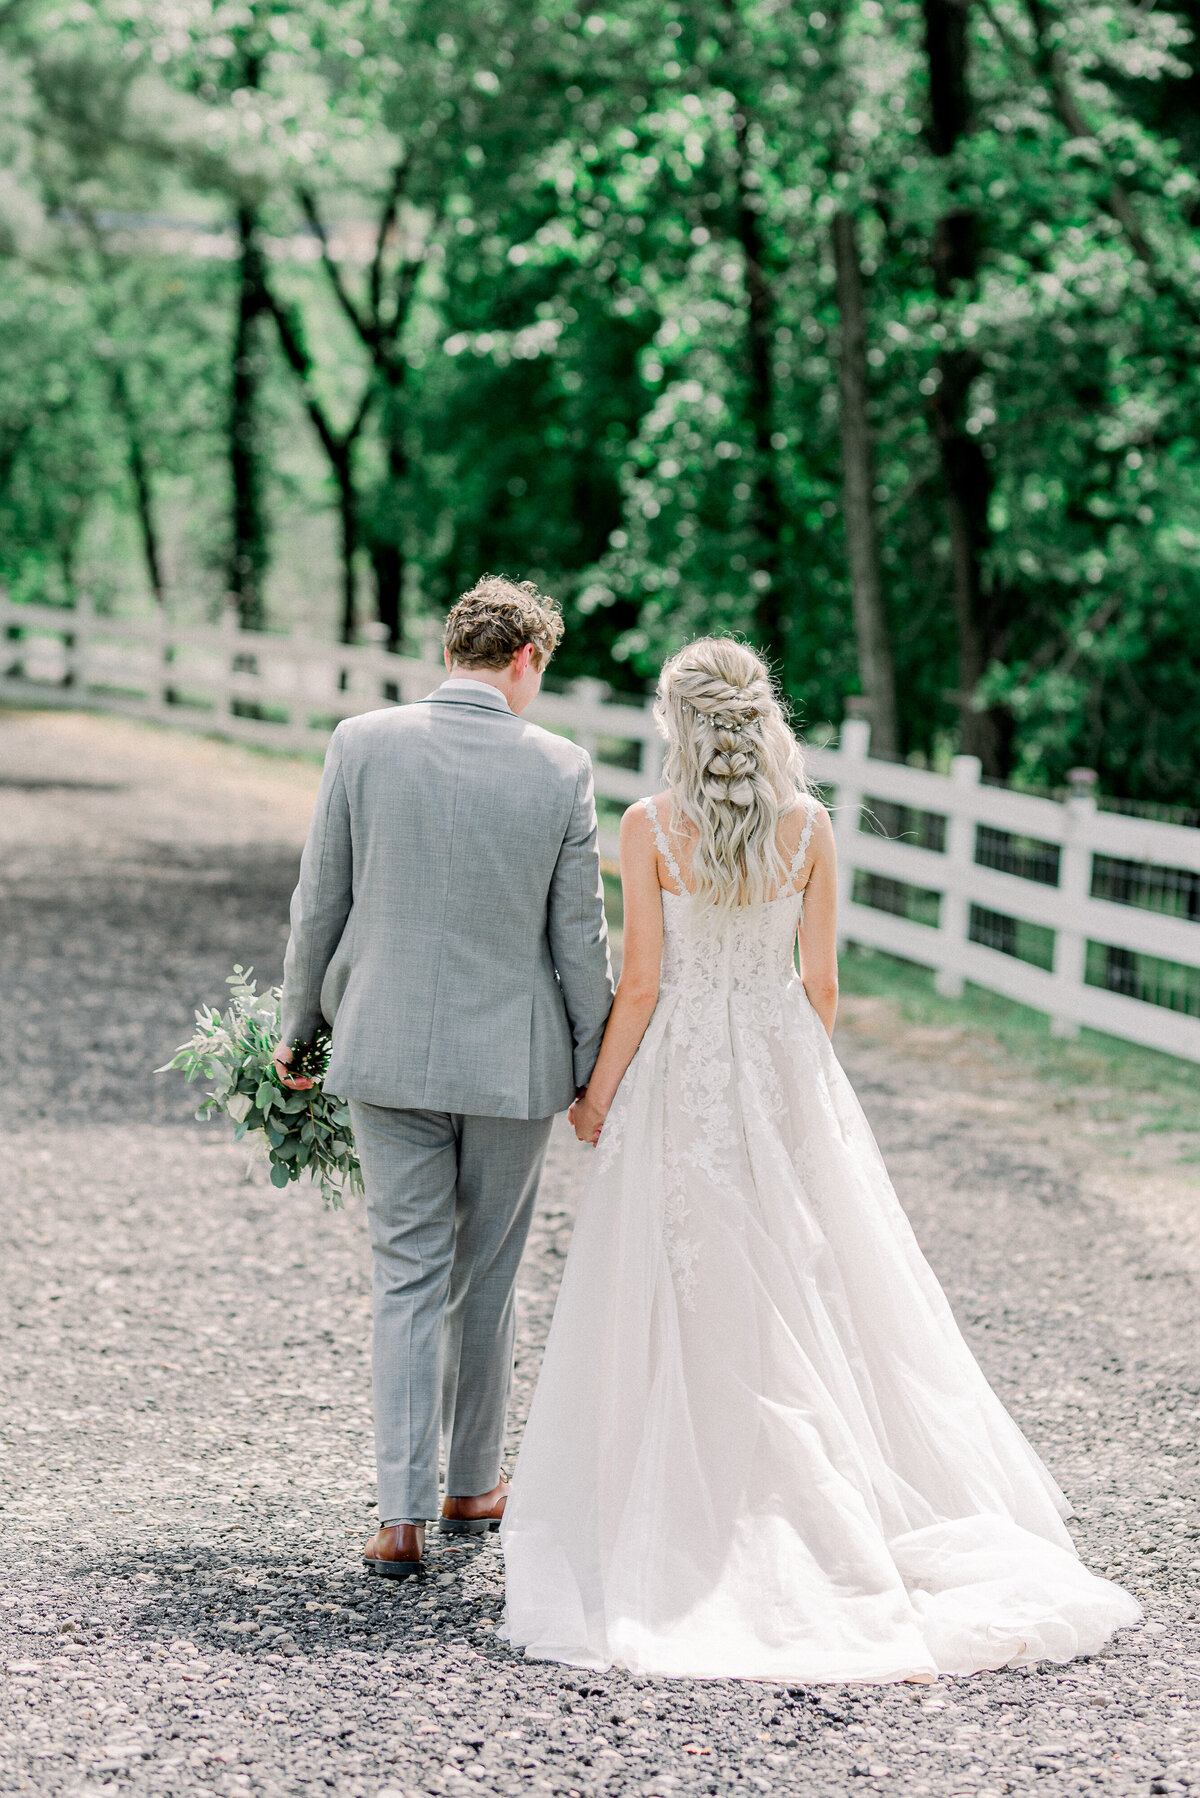 Bride and groom walking back down the road hand in hand